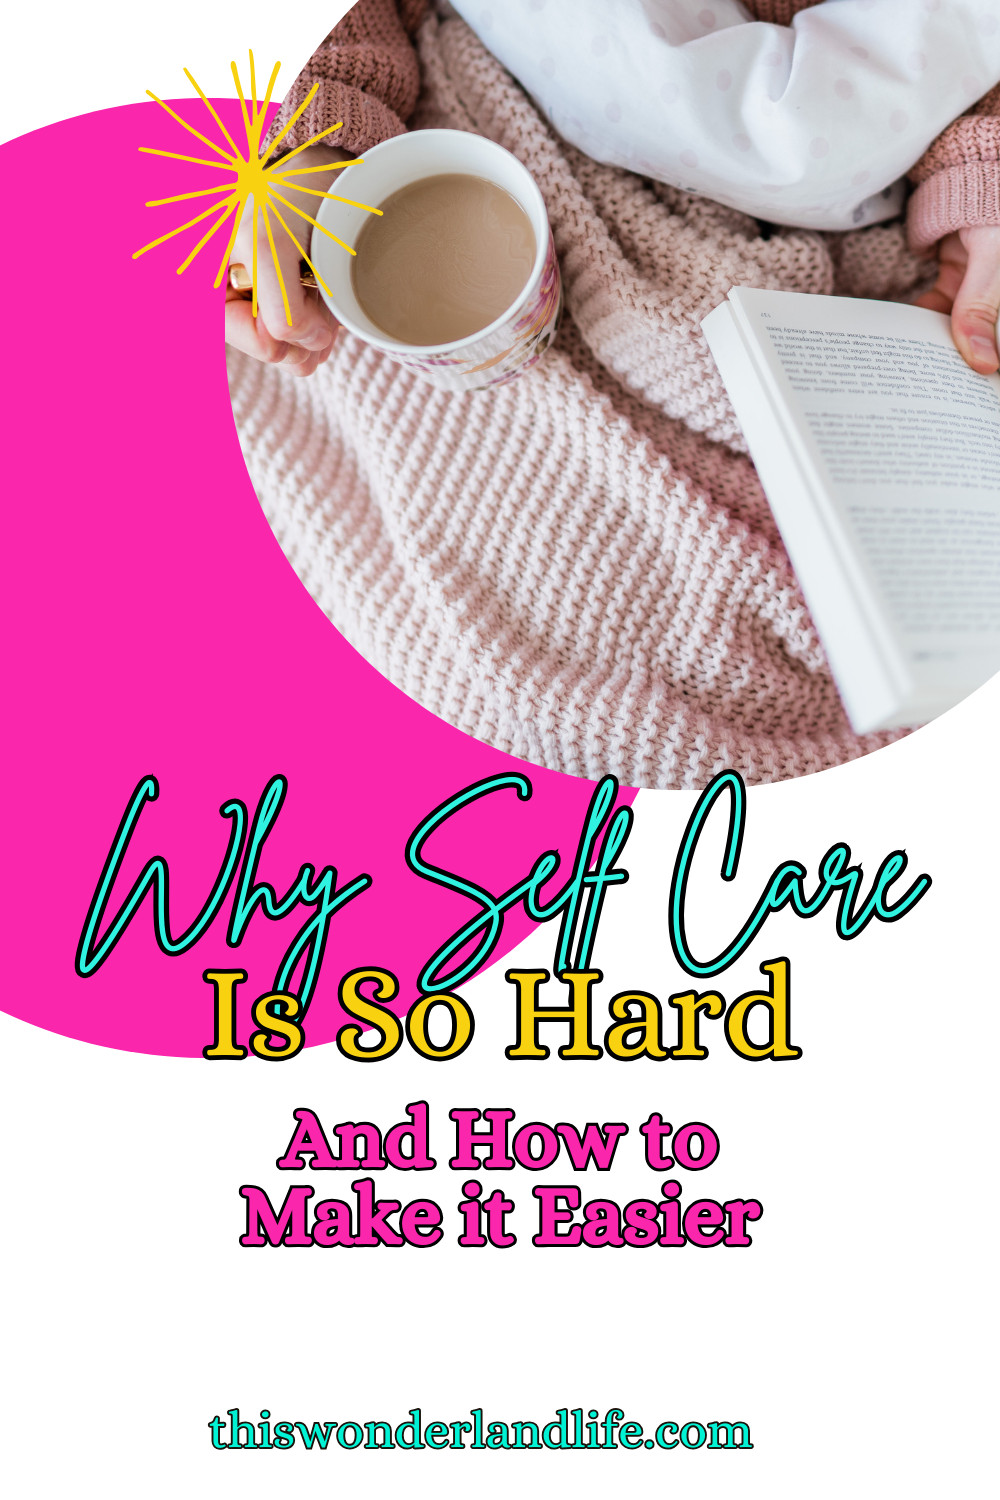 Why Self-Care is So Hard (And How to Make it Easier)